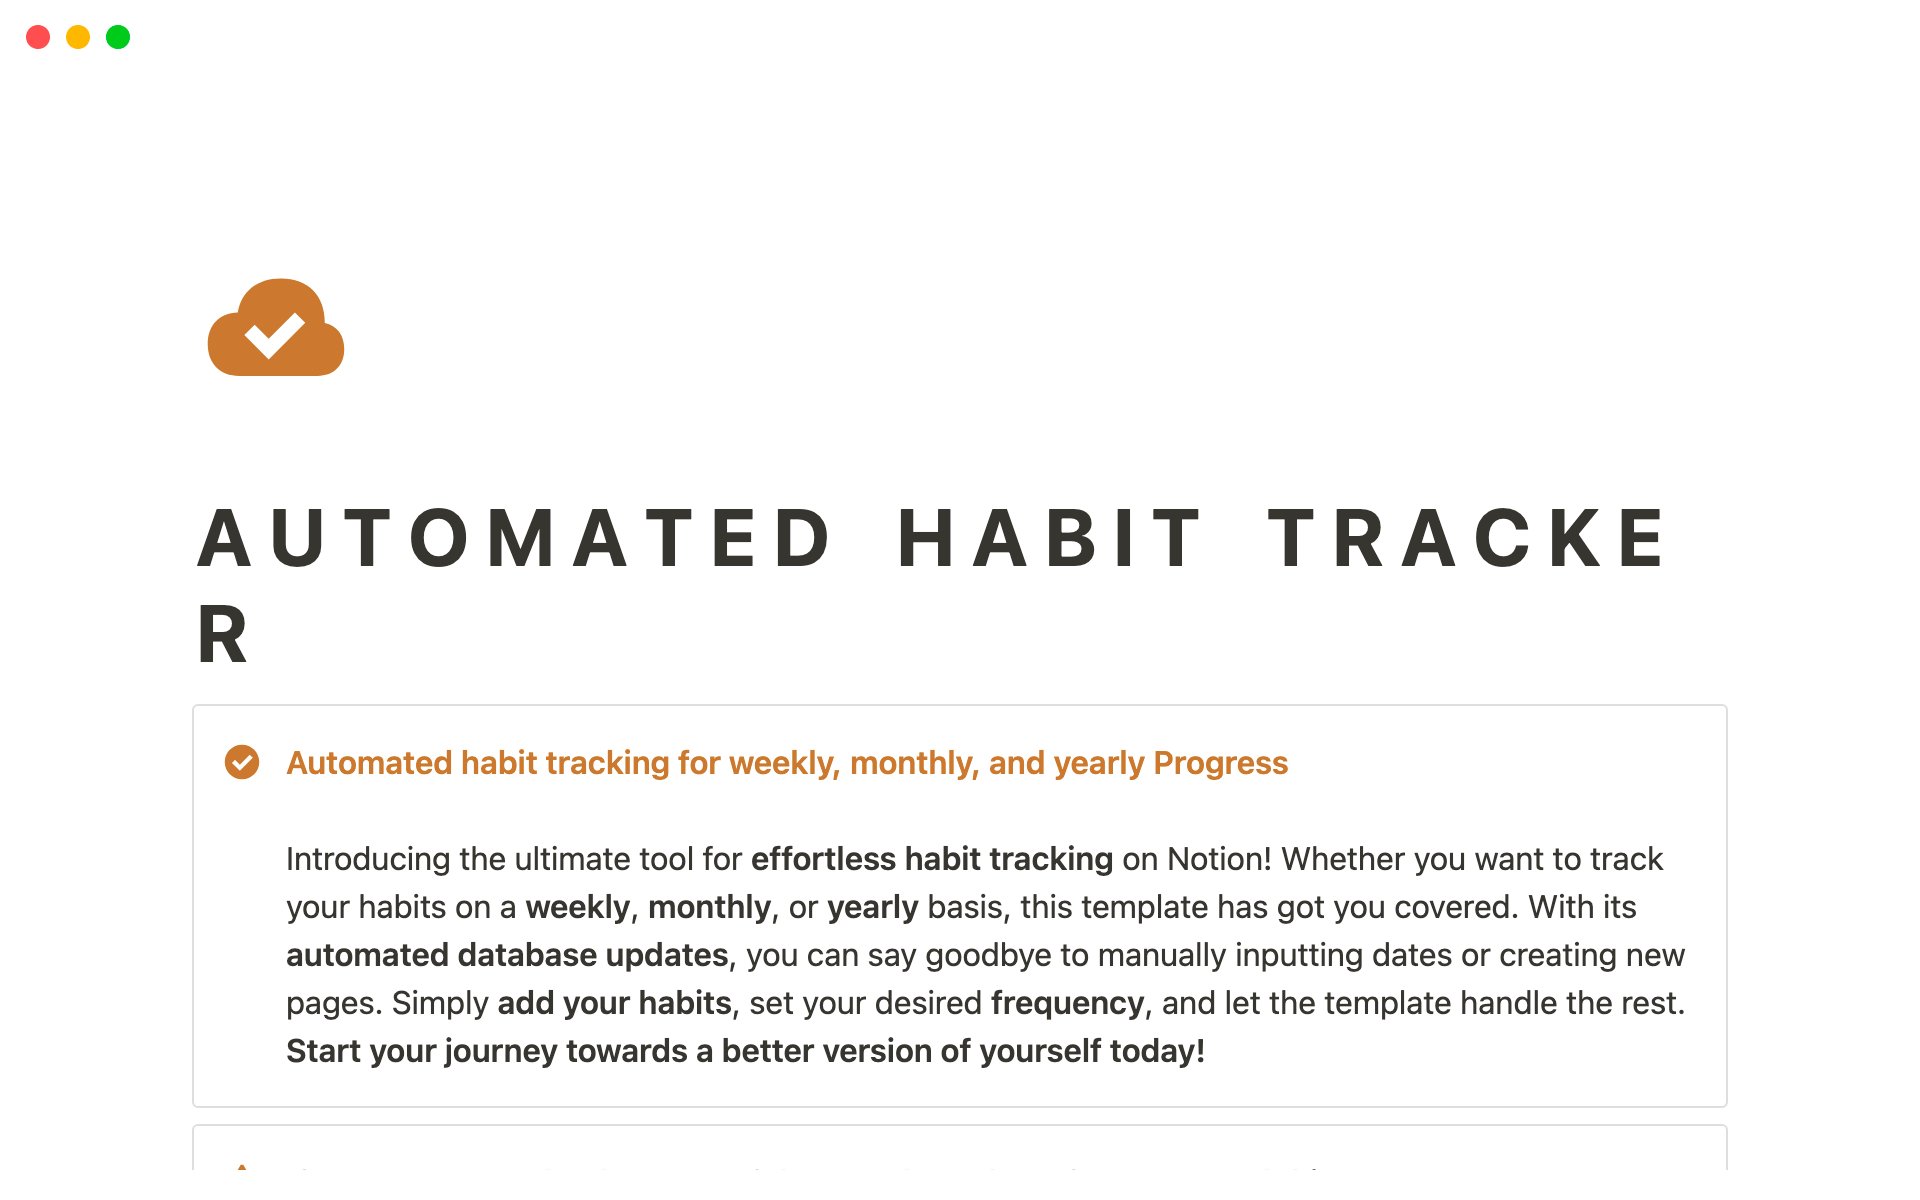 Effortless habit tracking (weekly, monthly and yearly), offering customizable tracking options and automated updates for seamless habit management, empowering you to embark on your self-improvement journey today.